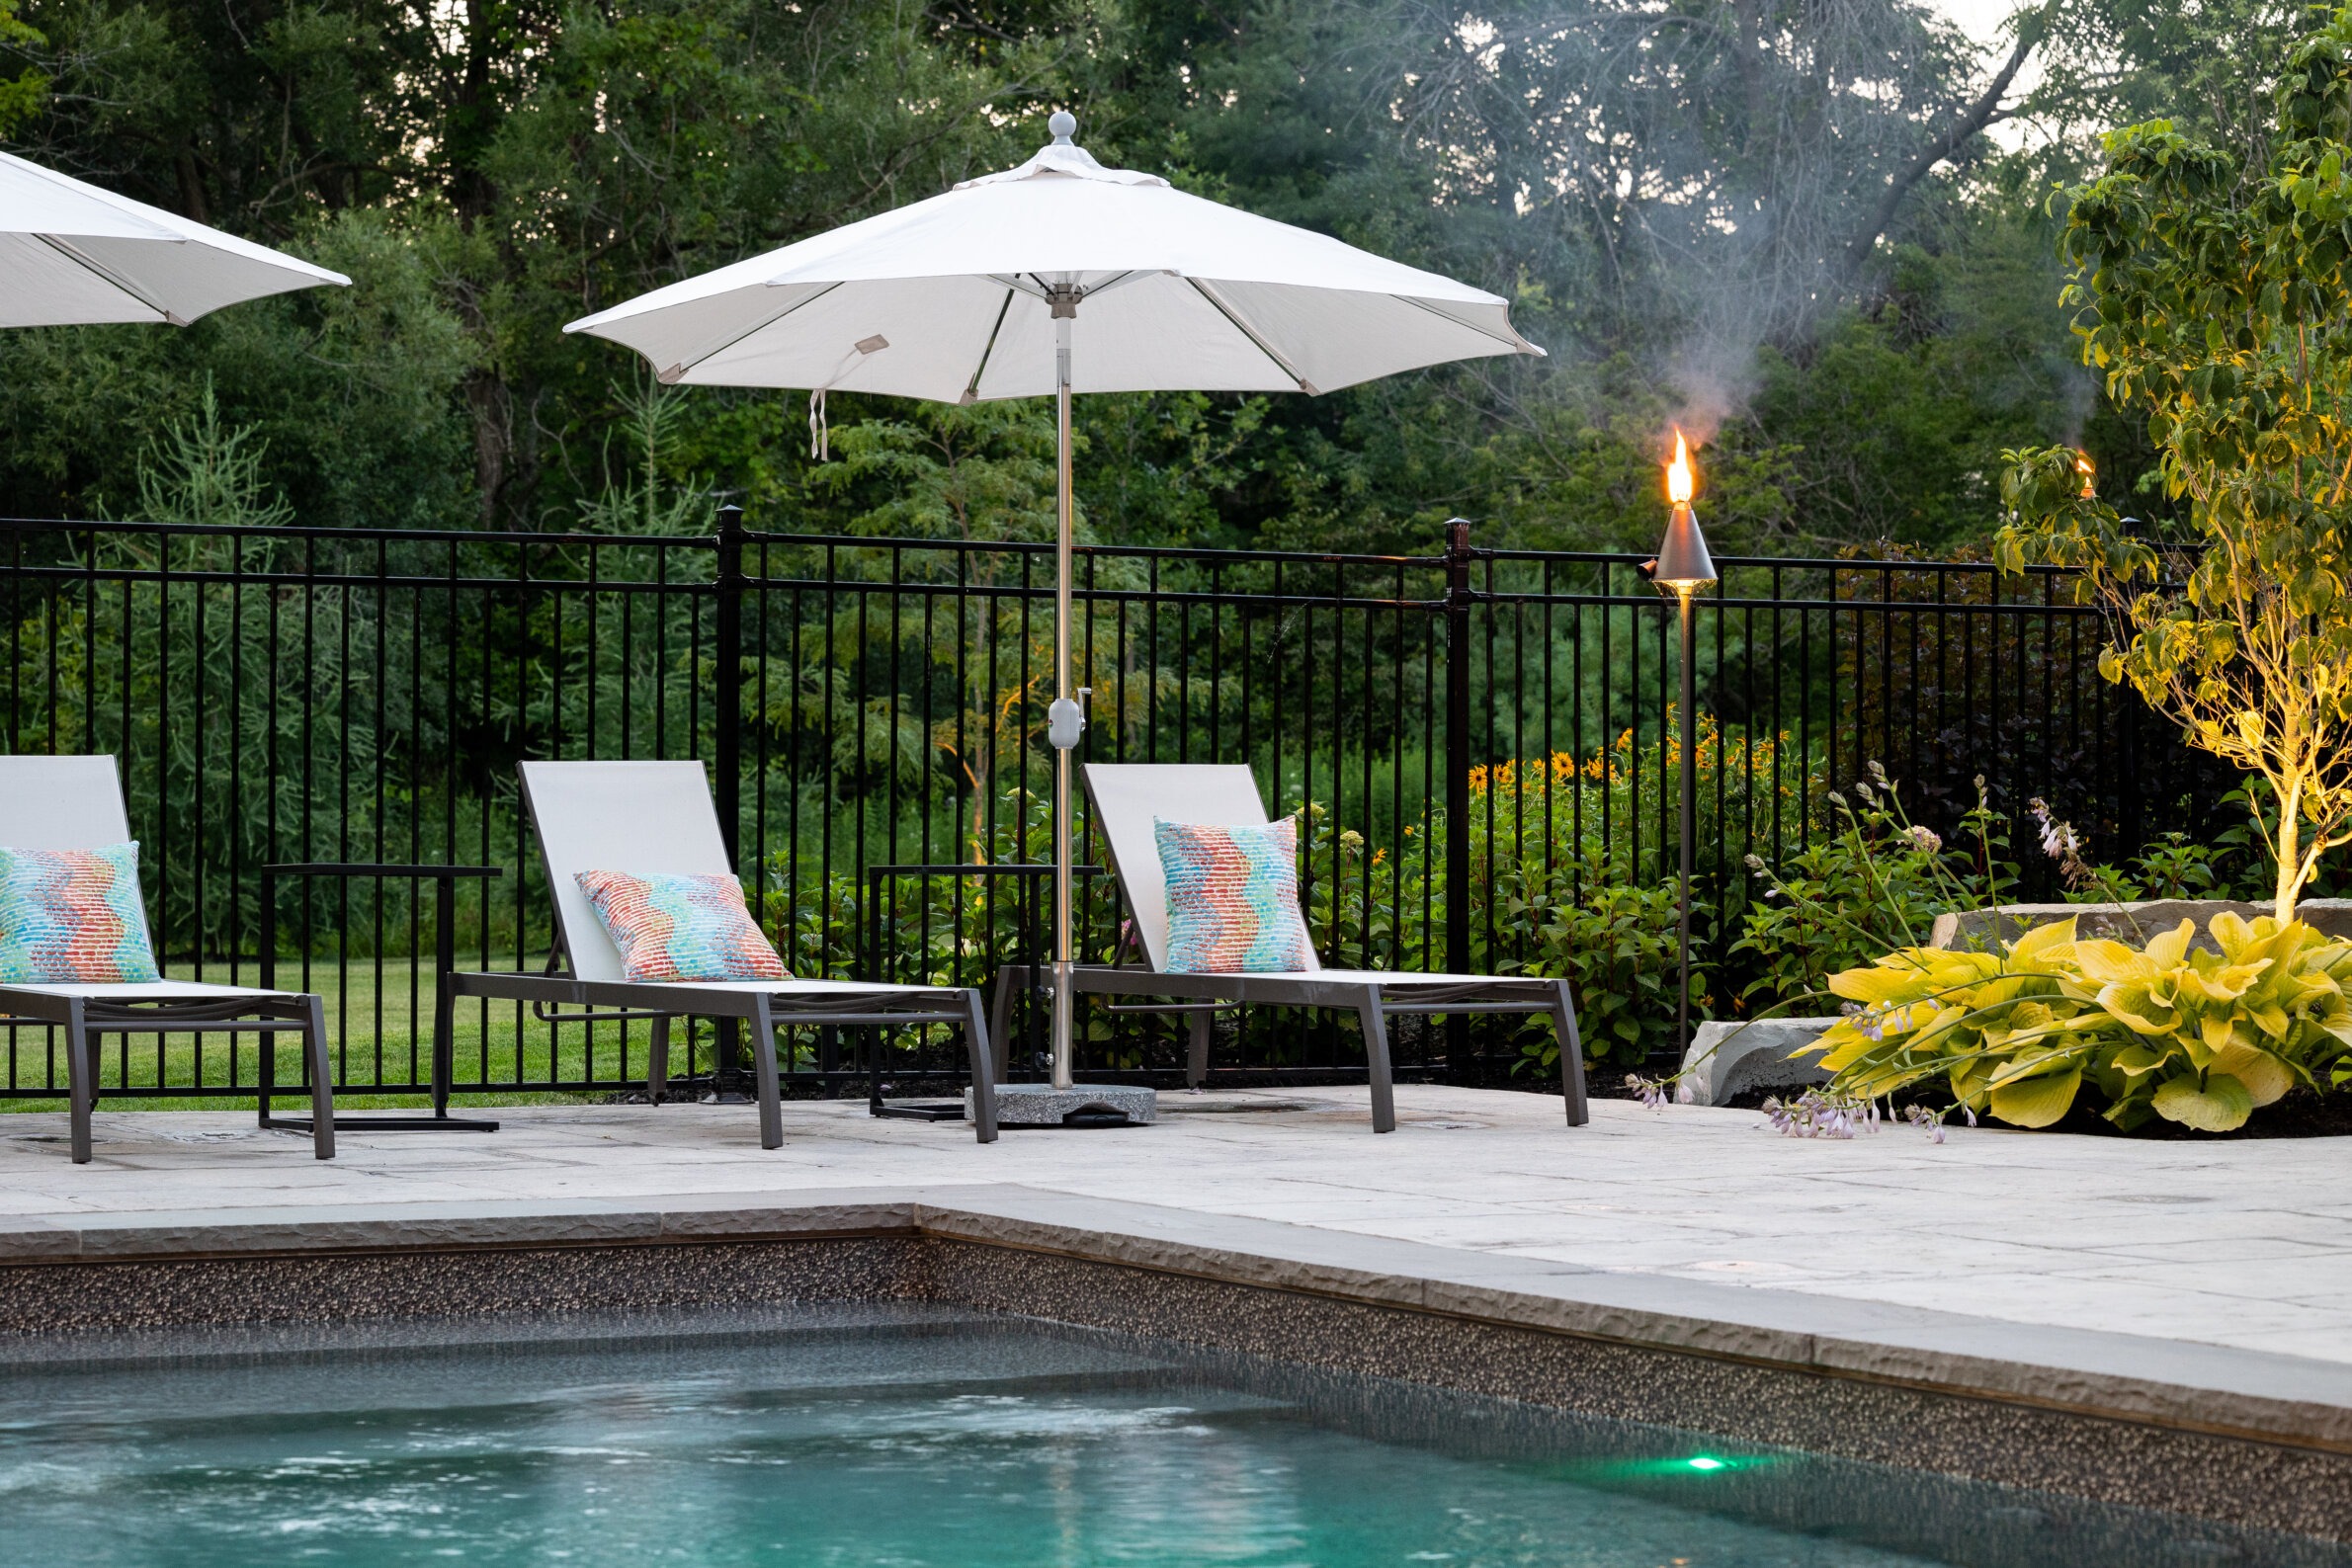 An inviting poolside setting with three lounge chairs under umbrellas, a lit torch, lush greenery, and a tranquil swimming pool at dusk.